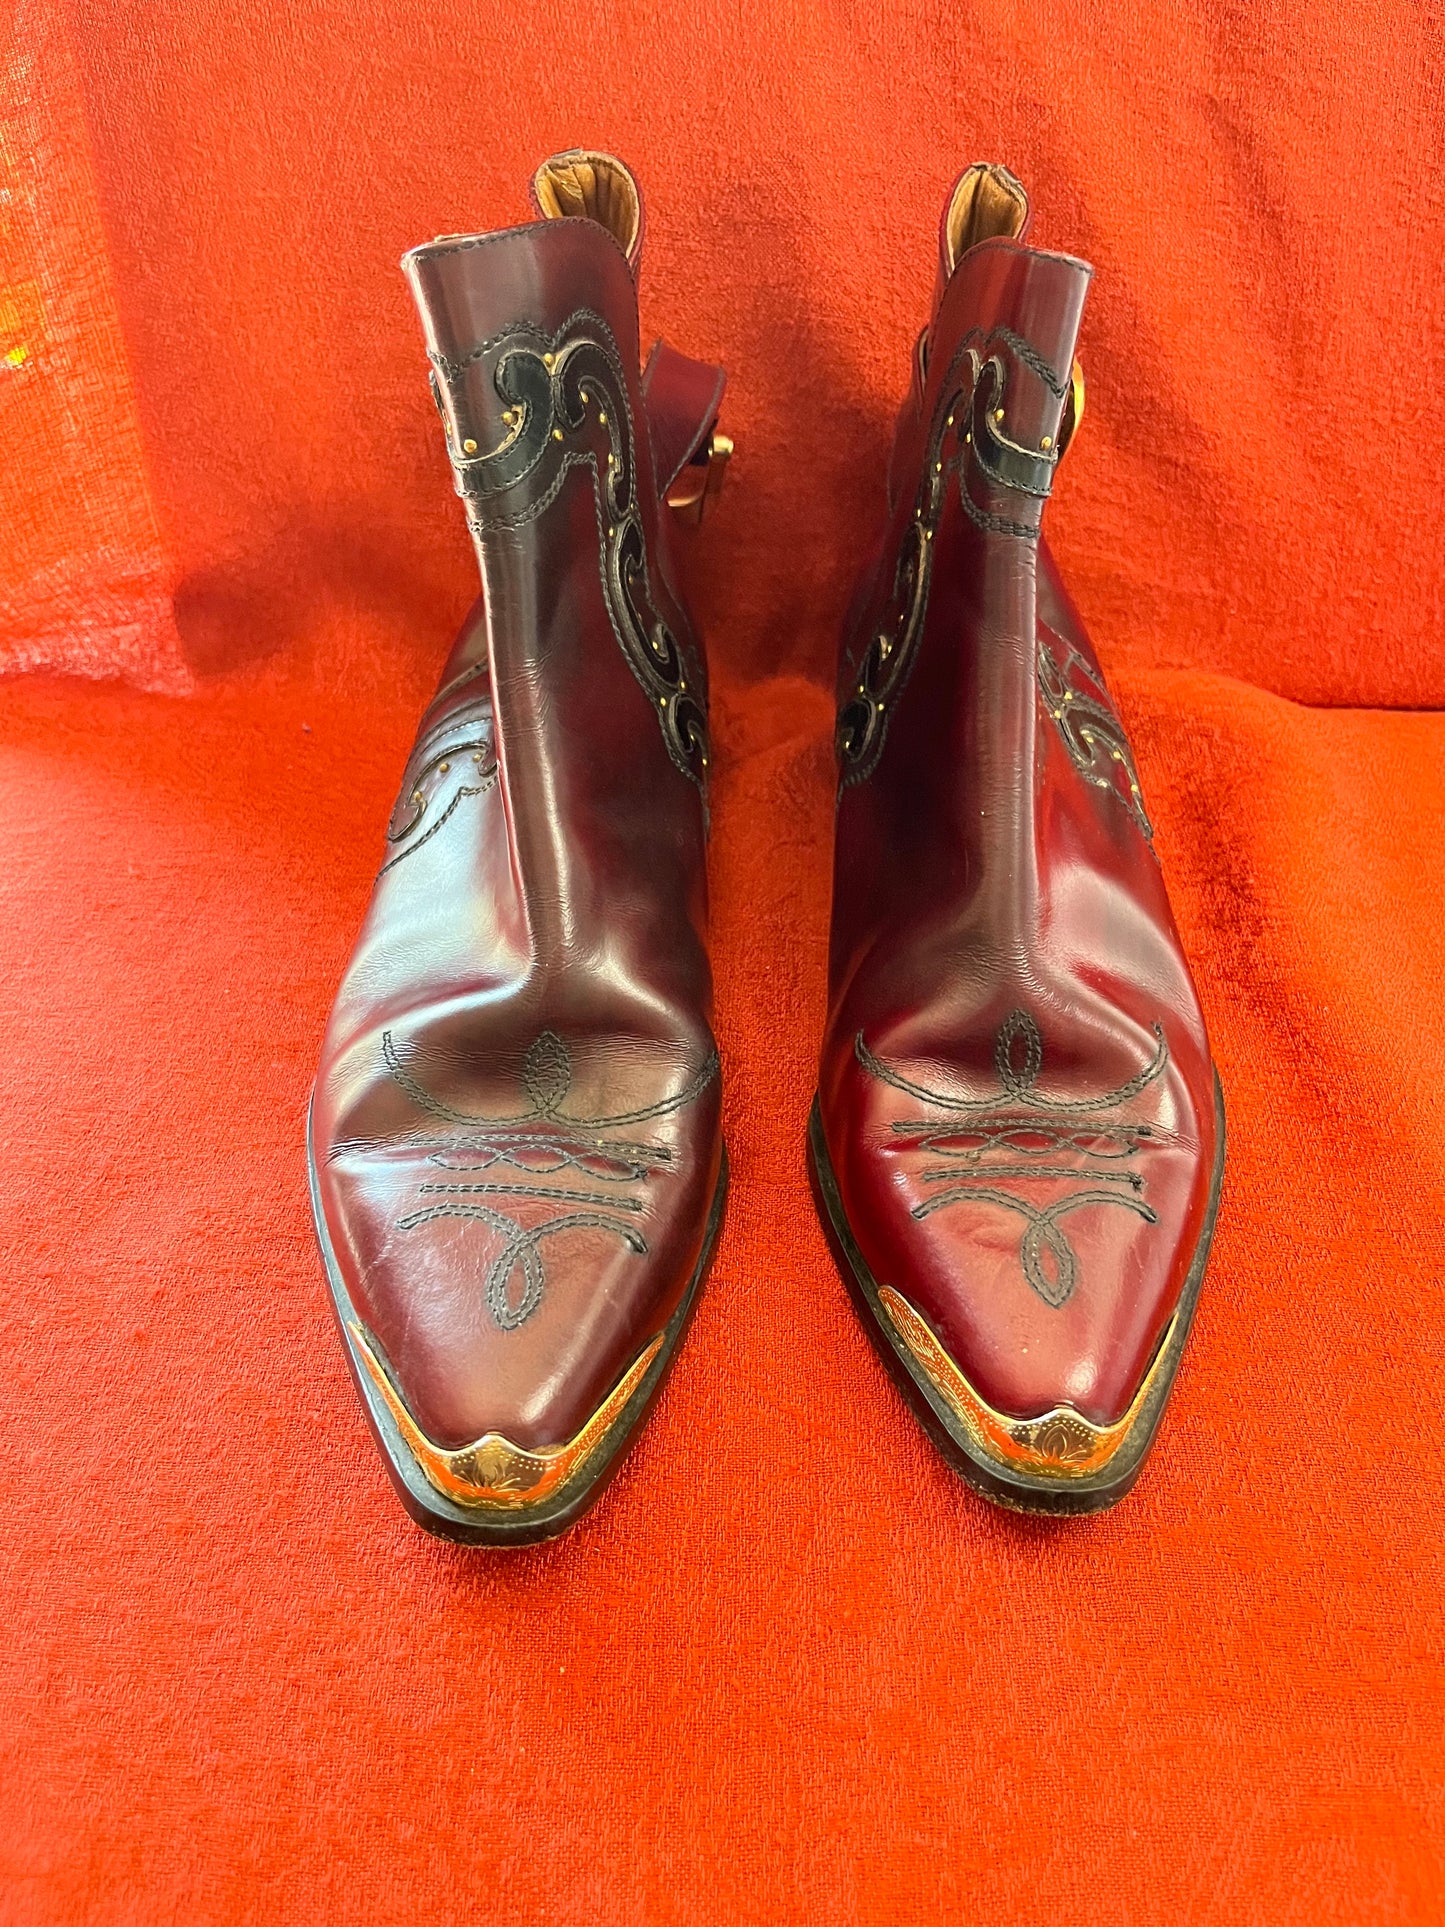 Pollini Hecho En Chilé Burgundy Leather Ankle Boots with Gold Tone Accents Size 39.5 (9 US)